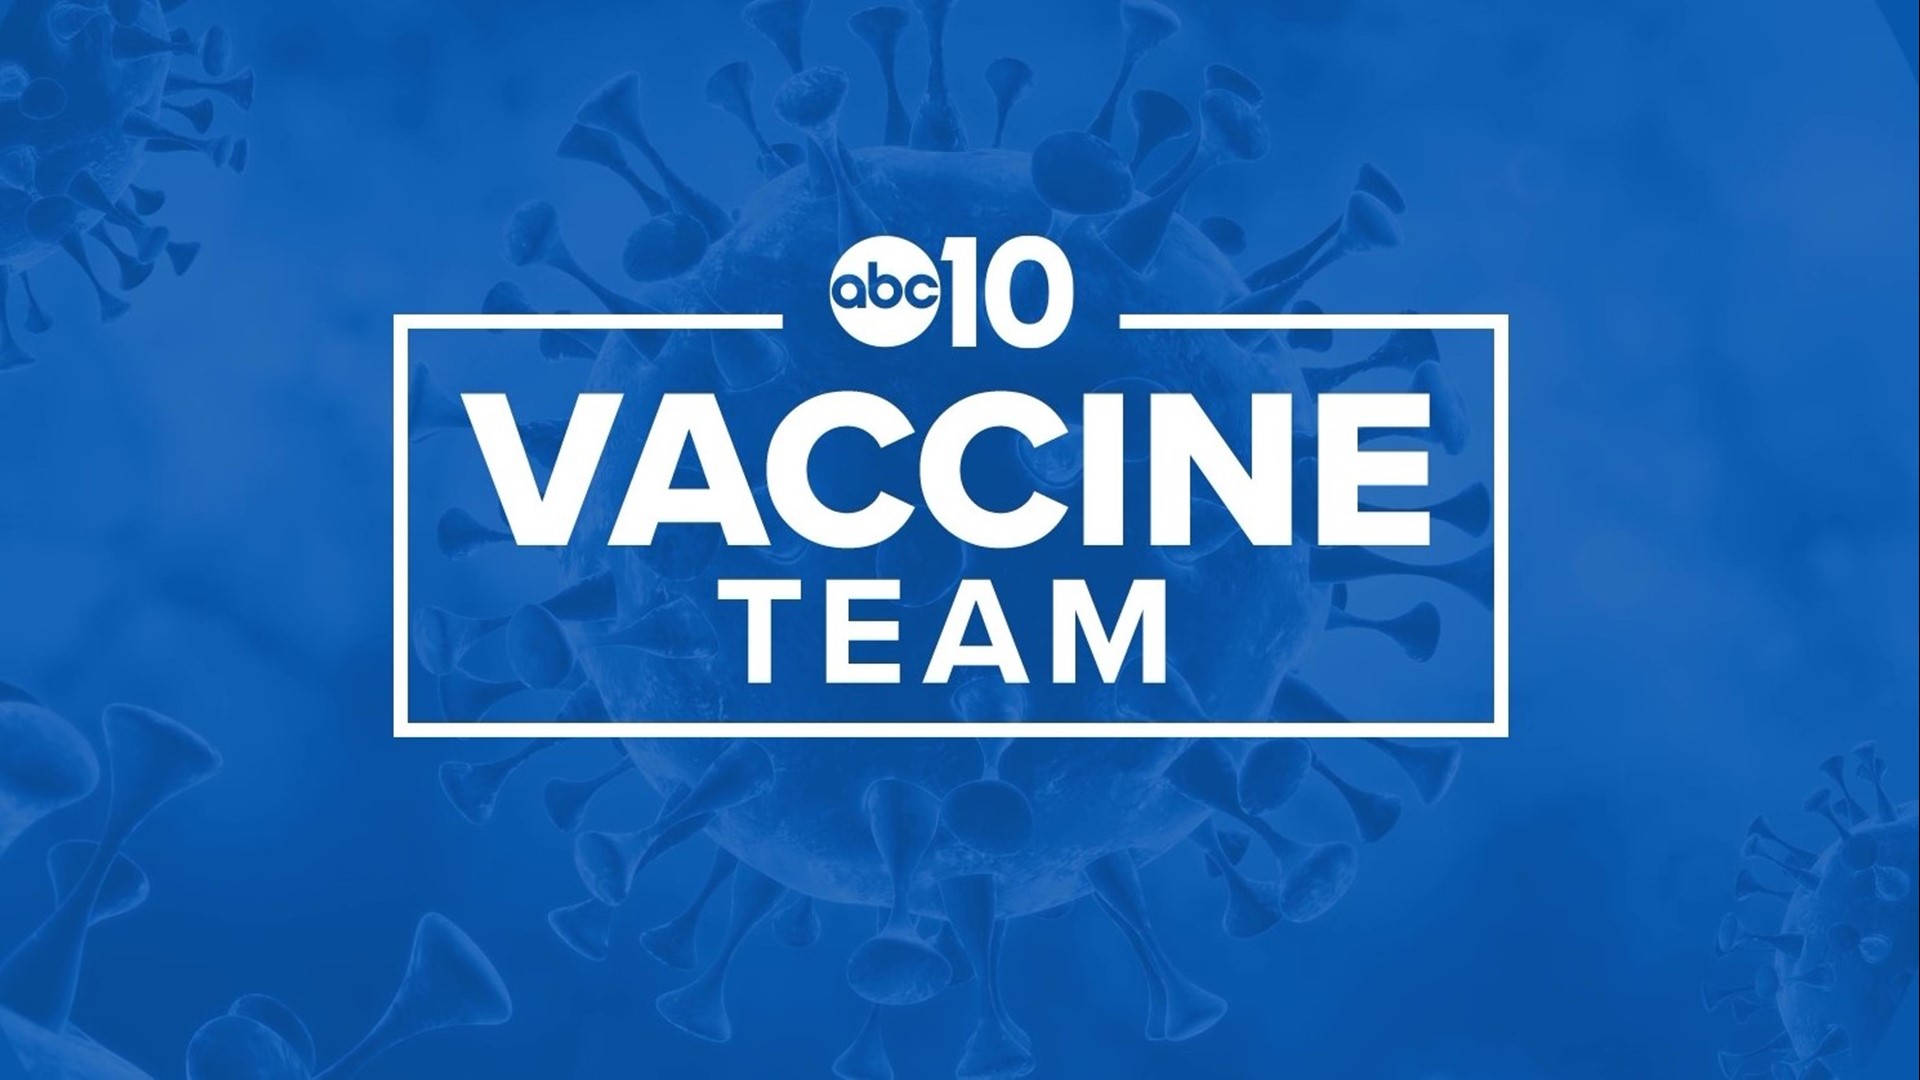 ABC10's Vaccine Team: We Stand For You.  Get the latest information on vaccine distribution and safety at https://www.abc10.com/vaccine